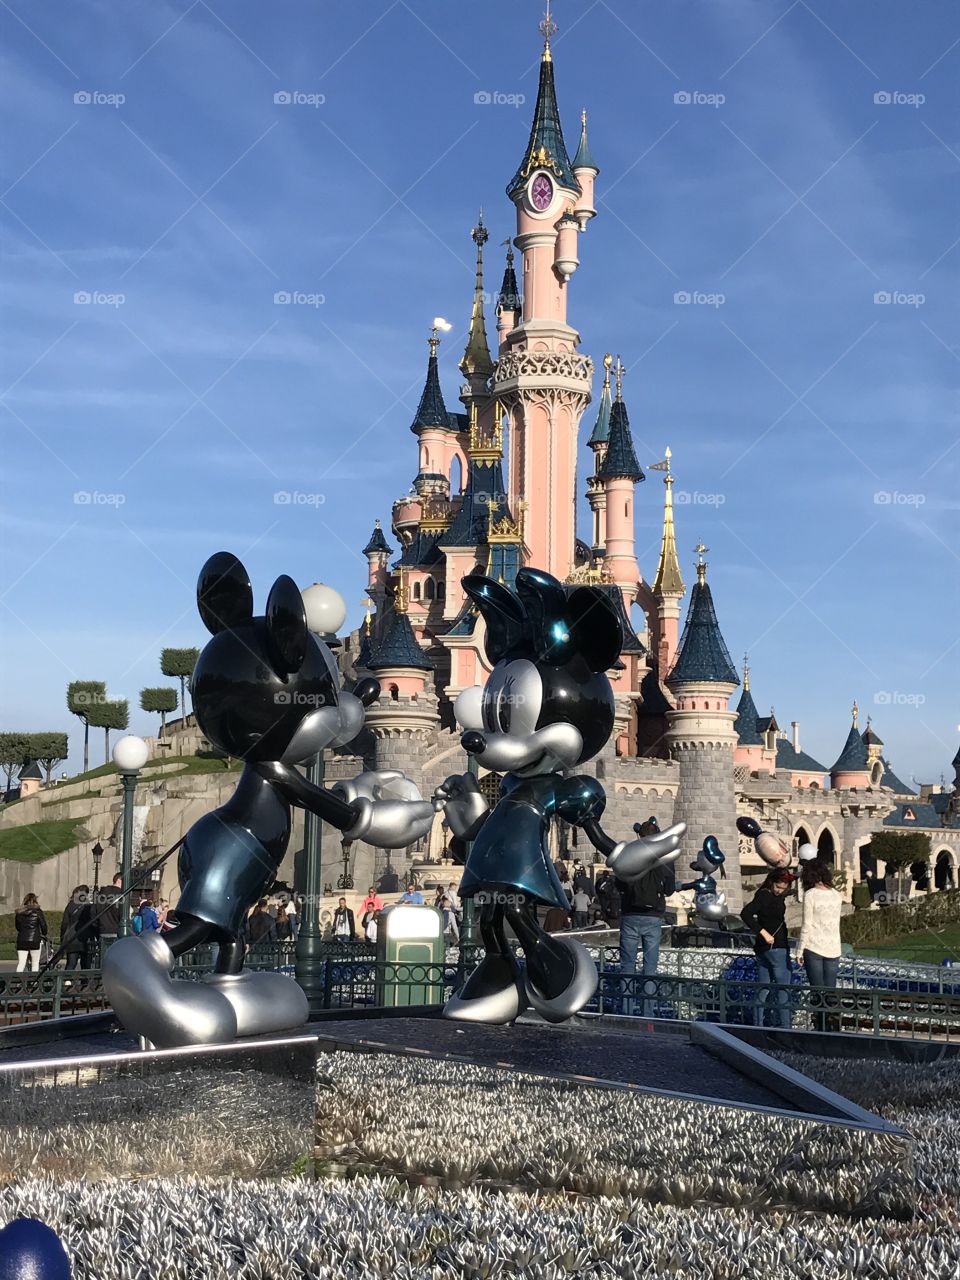 25th anniversary Mickey and Minnie in front of Disneyland Paris castle 